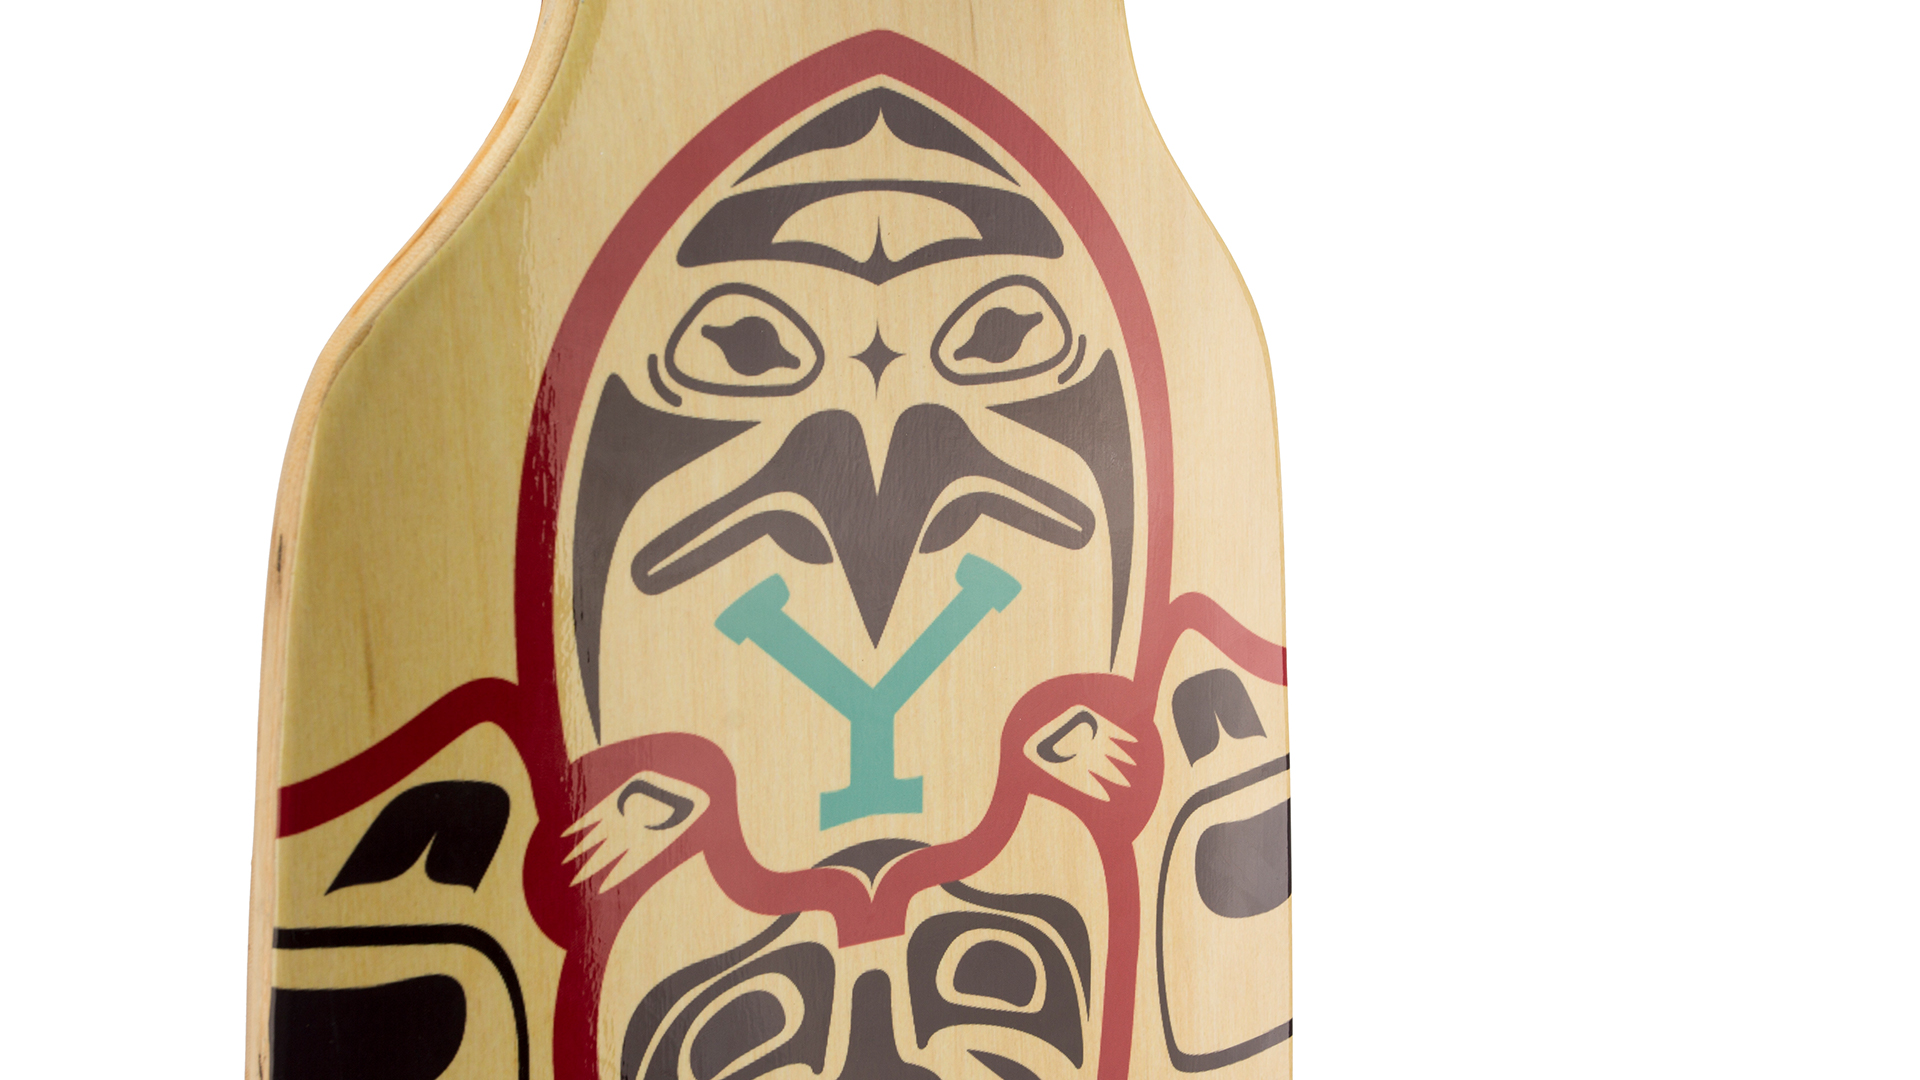 Yunika Iconic product photos, features First Nation Totem design